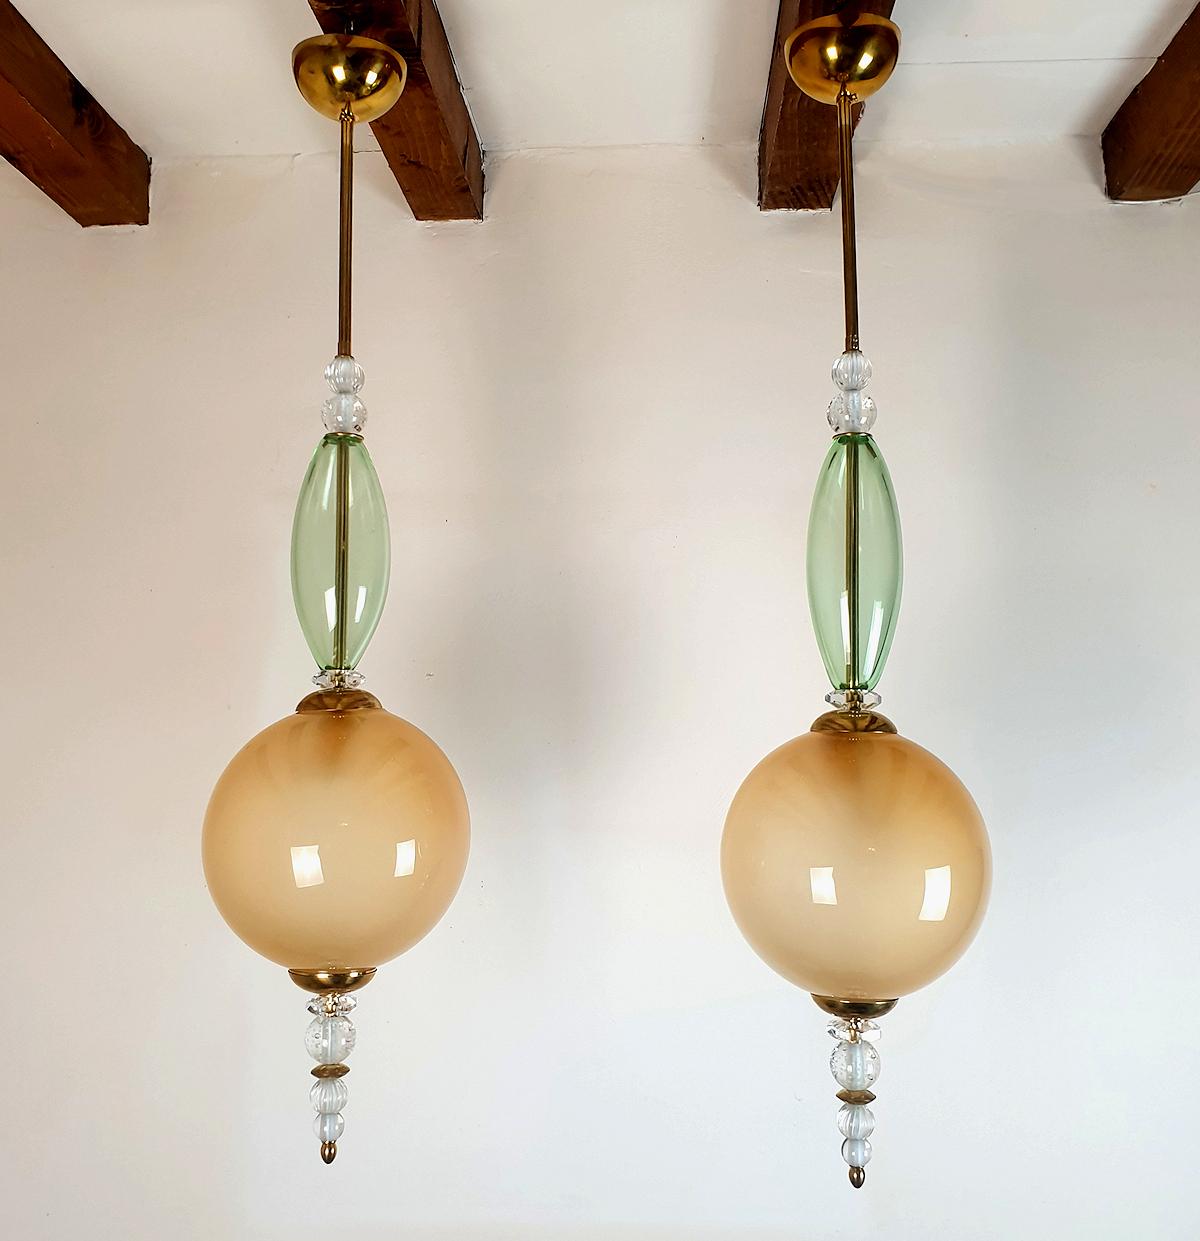 Pair of tall Mid-Century Modern pendant chandeliers, Murano glass & brass, attributed to Cenedese, Italy 1980s.
The vintage pair of pendants is made of a translucent beige globe nesting the light, clear light green and crystal cut elements, on a